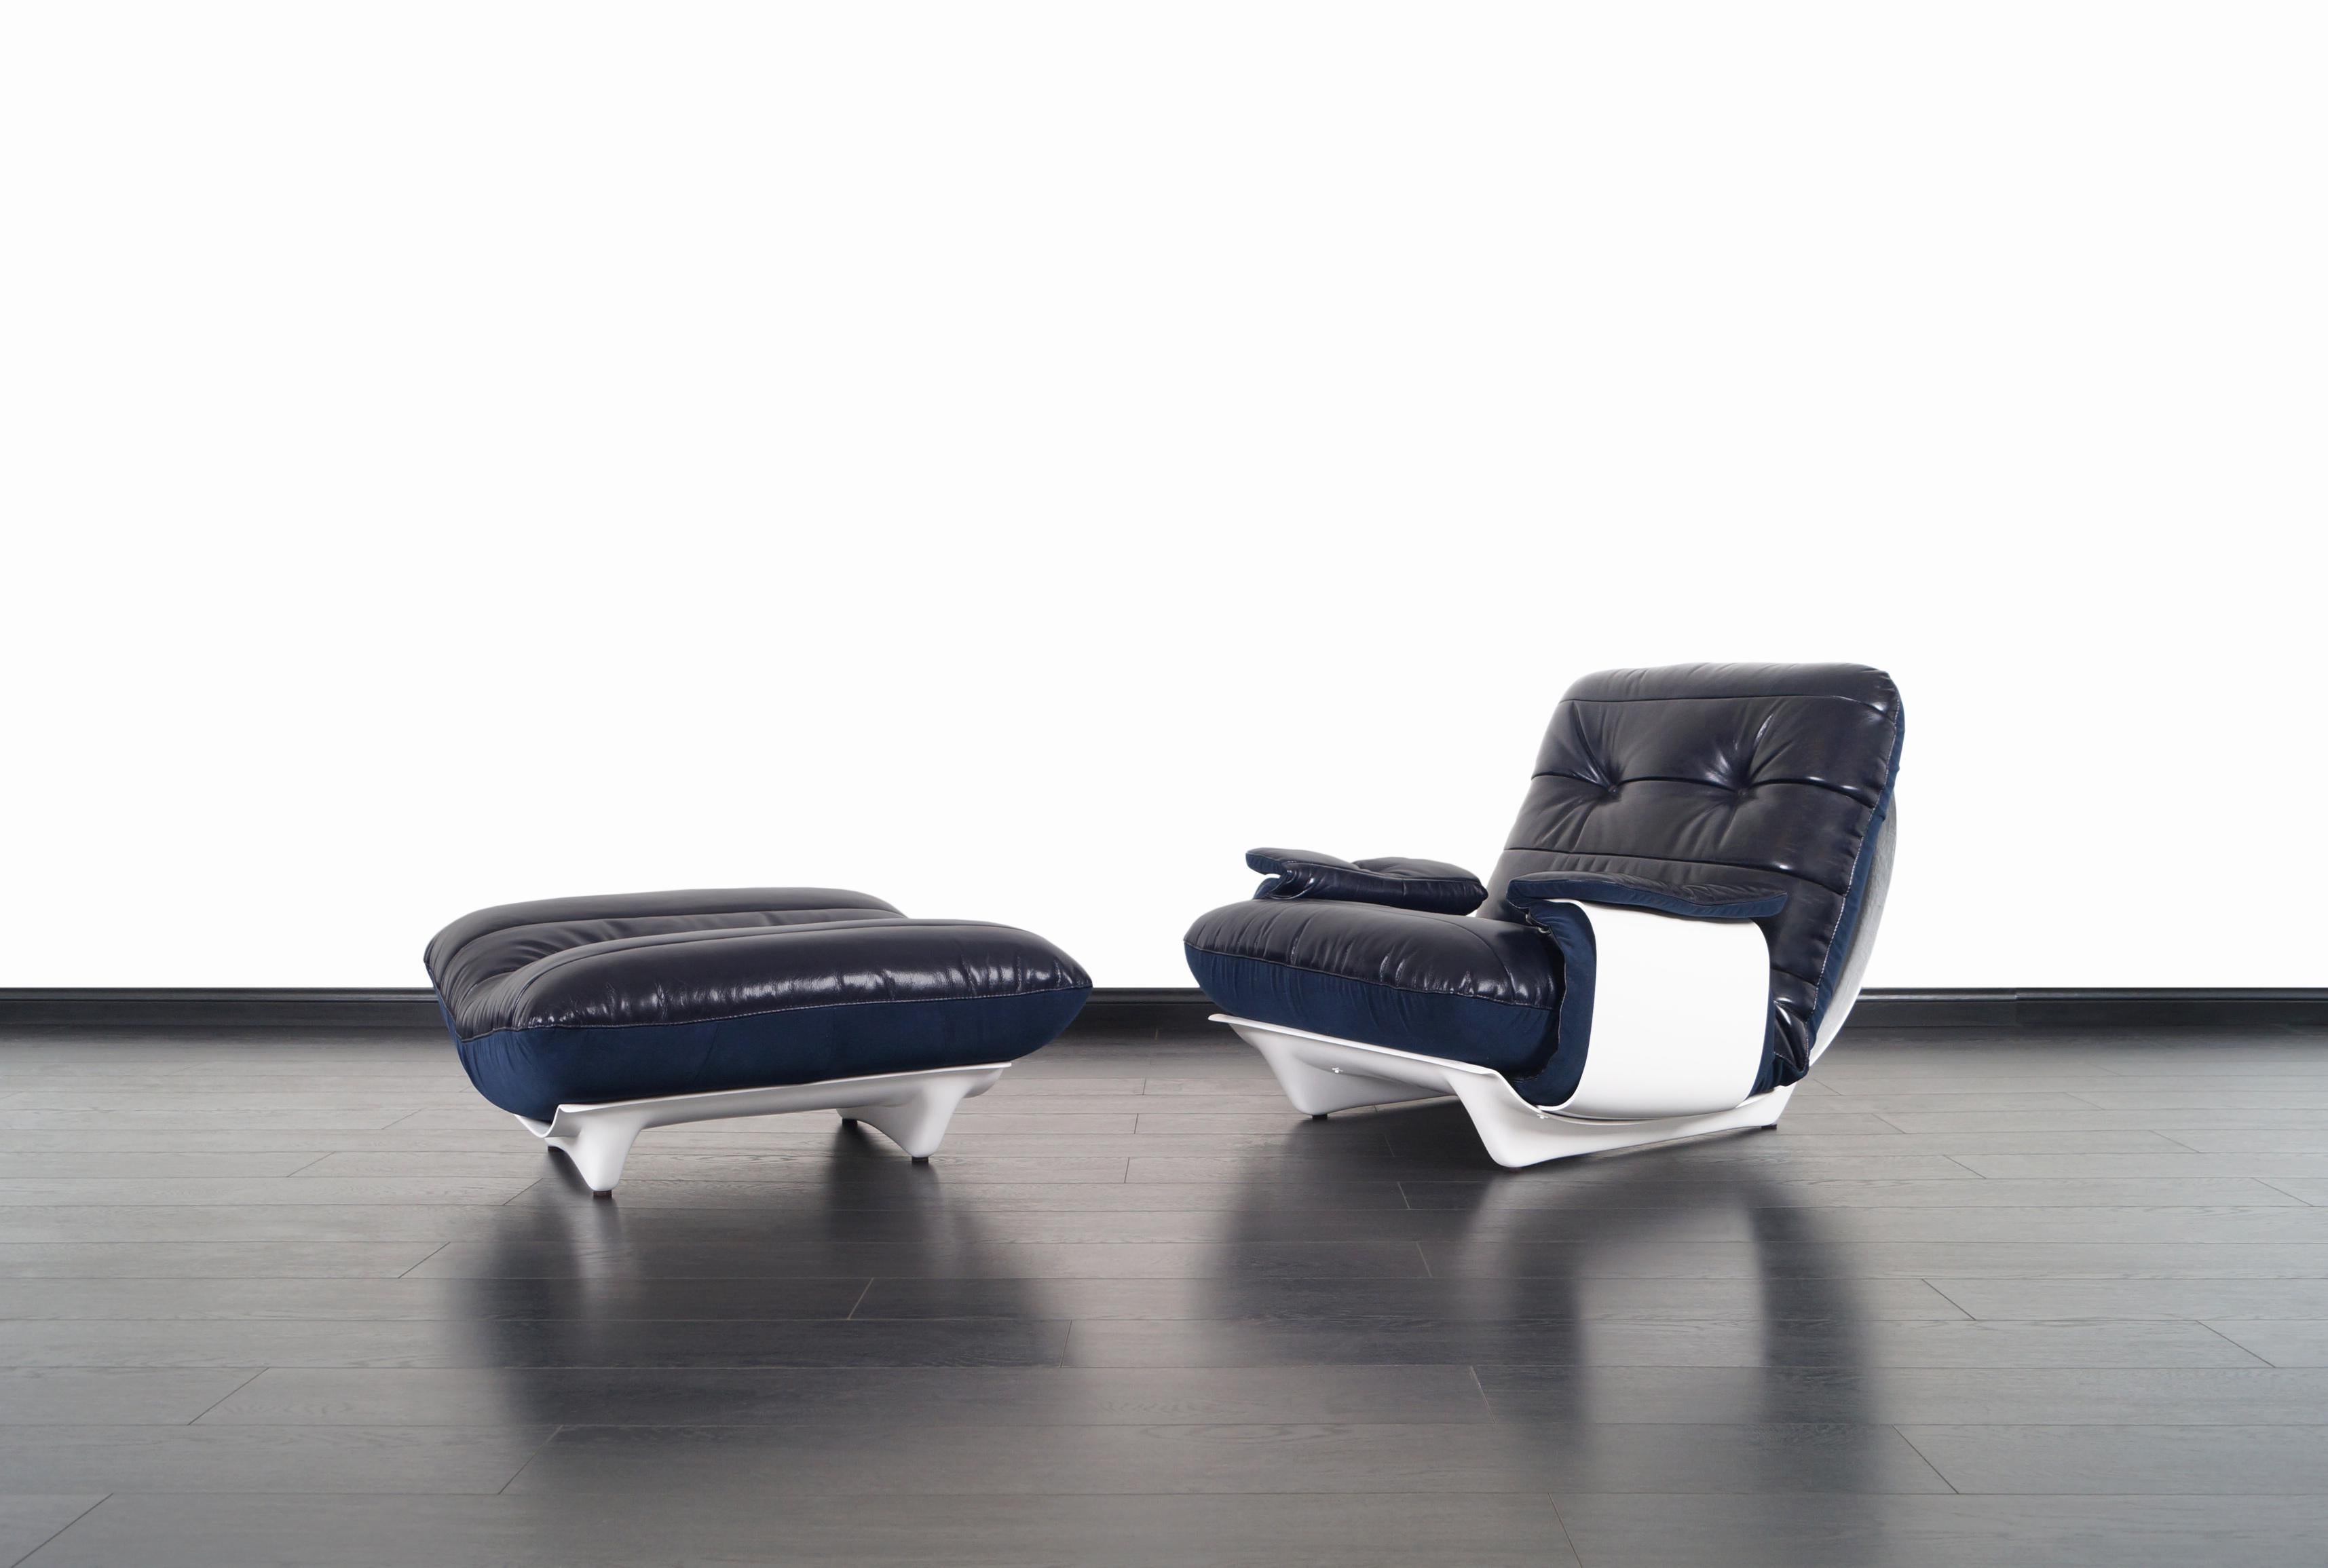 A stunning vintage leather lounge chair and ottoman designed by Michel Ducaroy for Ligne Roset in France. This modernist lounge chair and ottoman are from the 